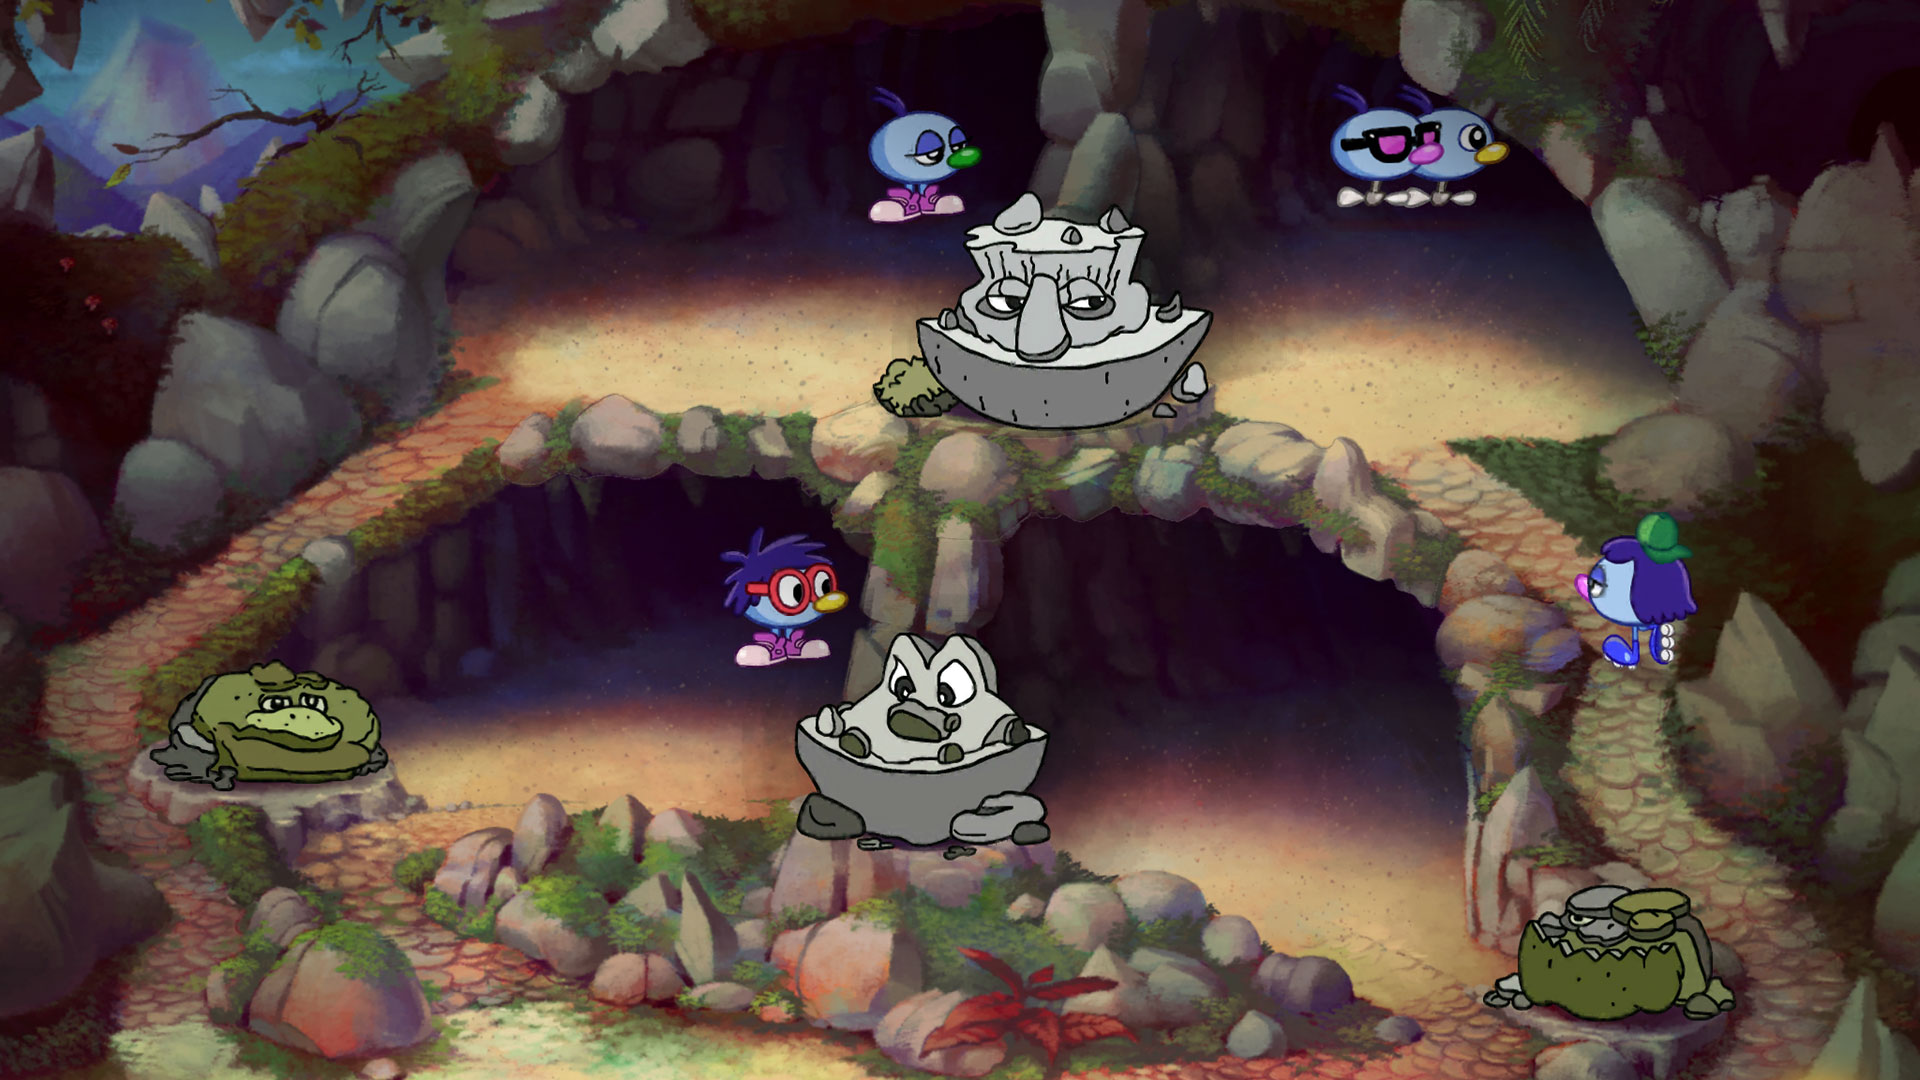 zoombinis game online